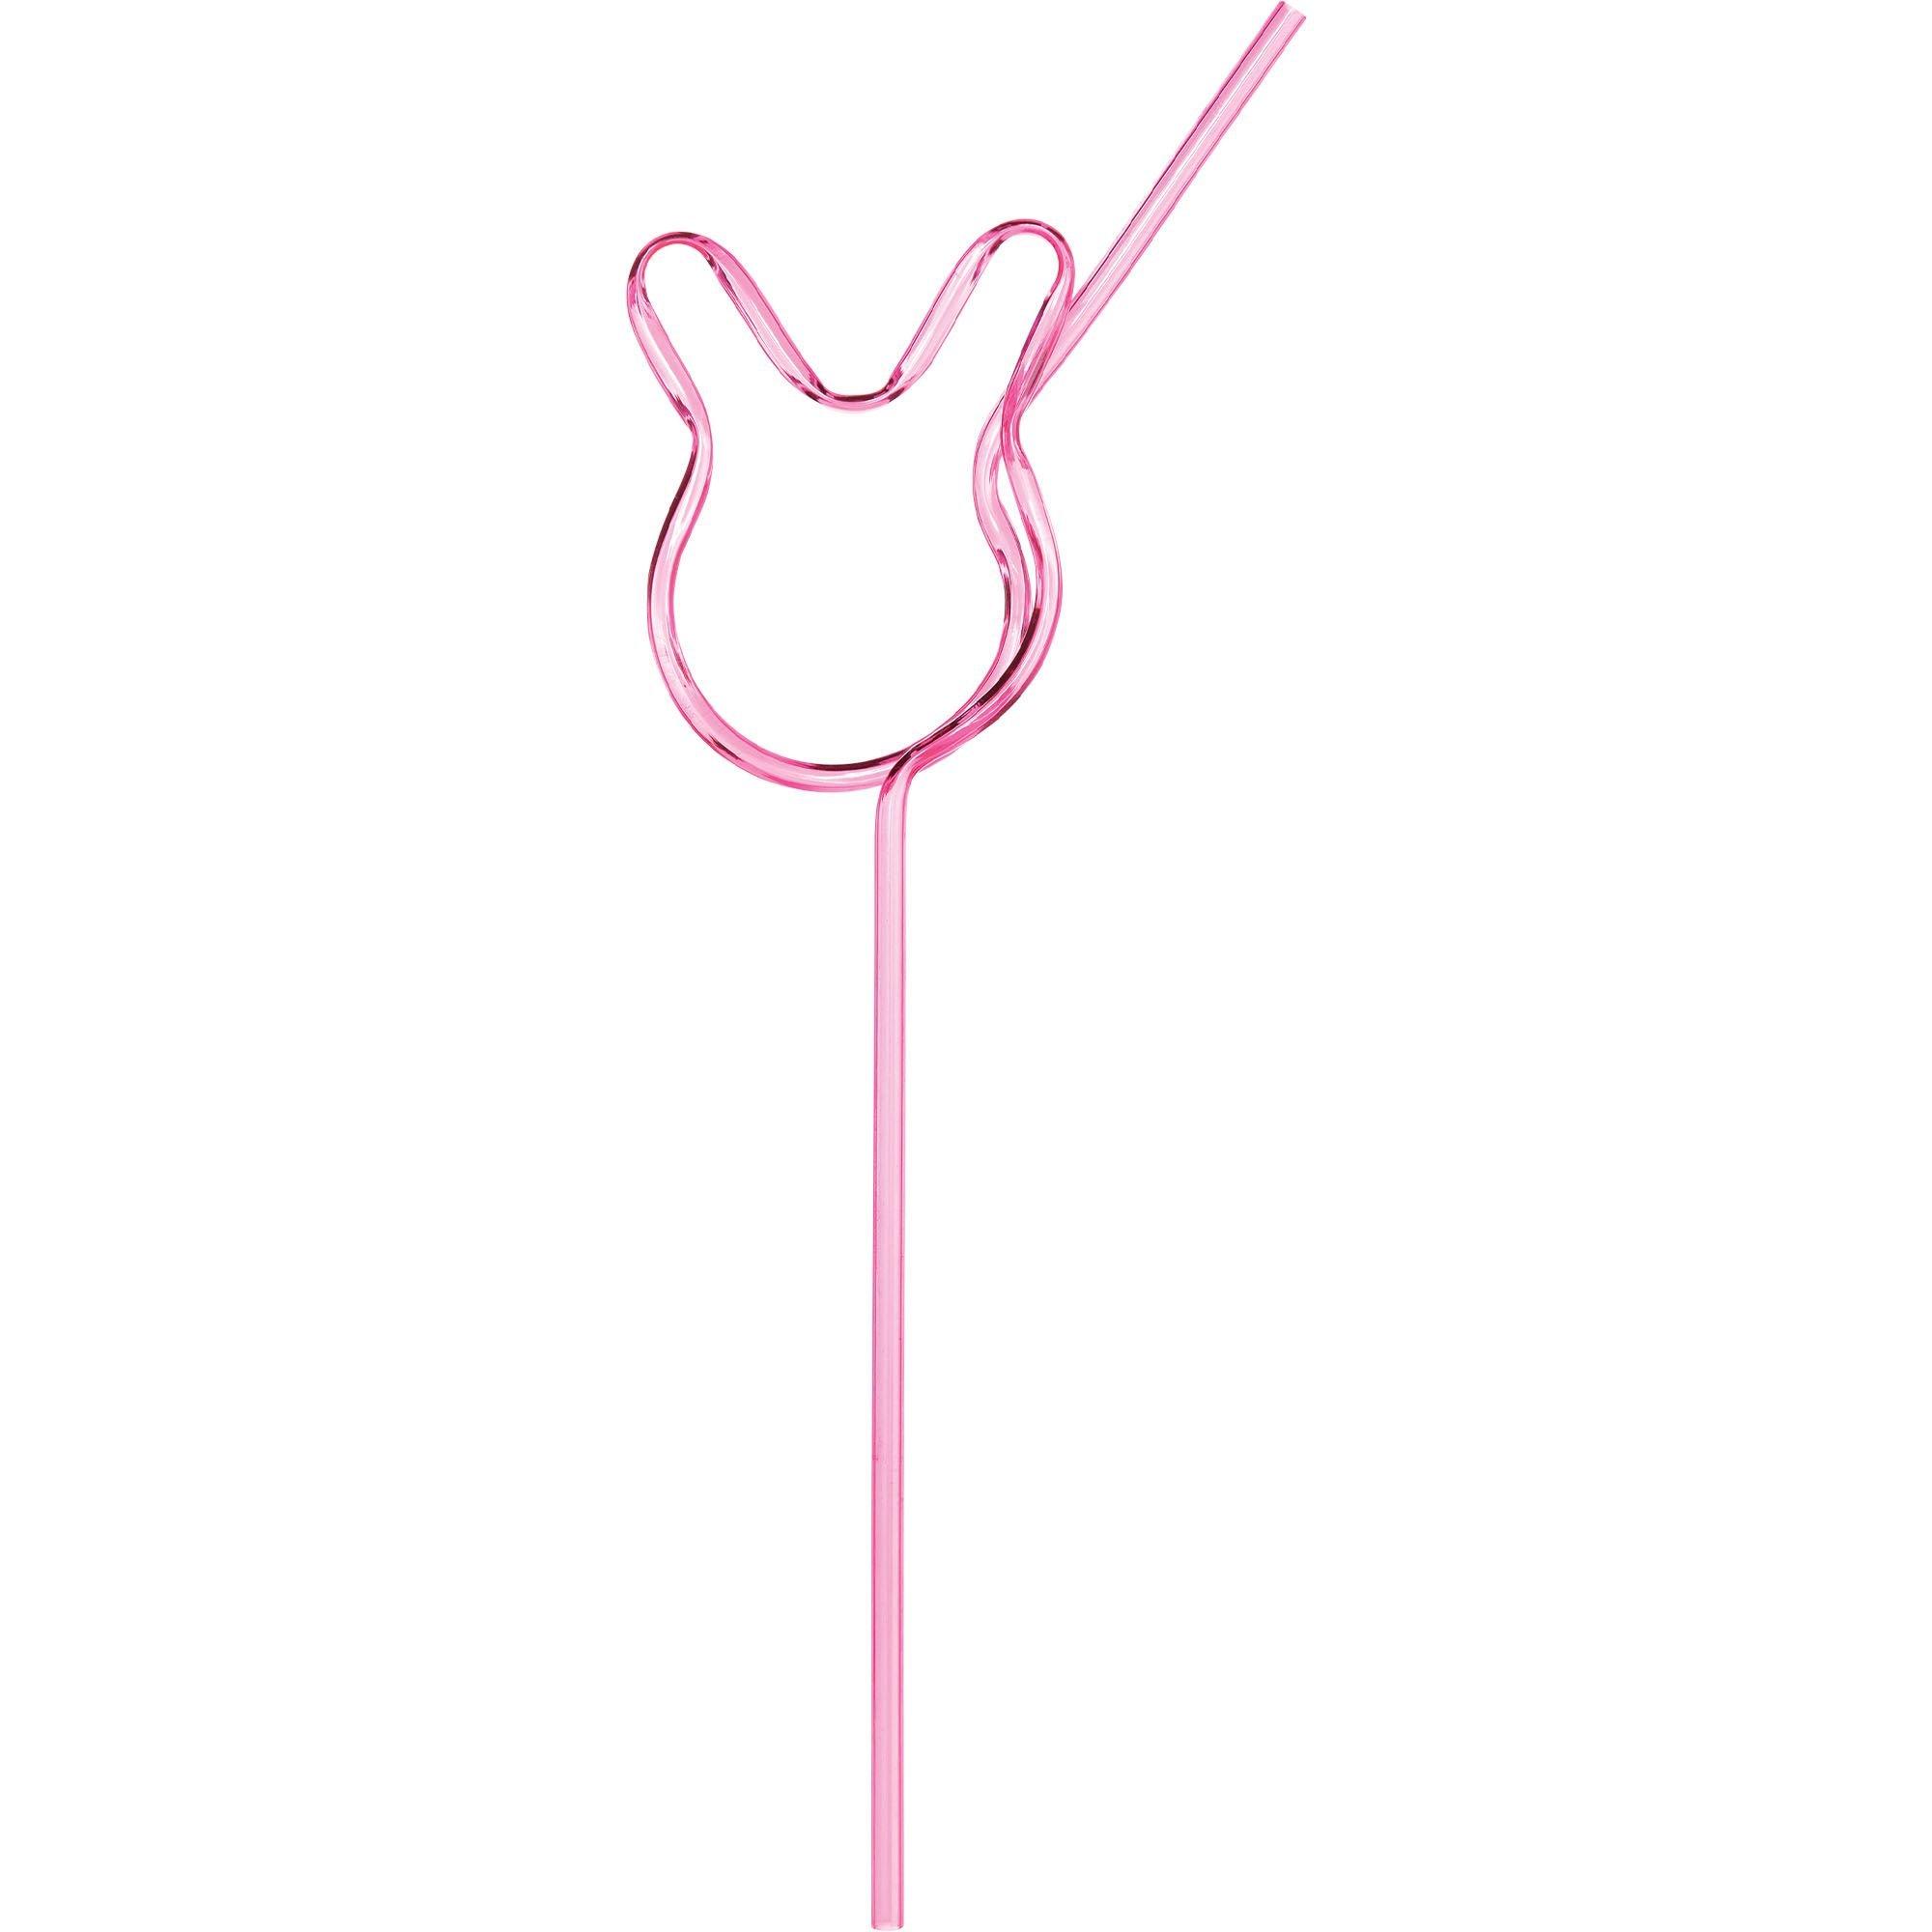  Pink Formal Paper Party Straws - 25 Pack – Girl Baby Shower  Straws, Princess Straws, Pink Striped Straws : Health & Household